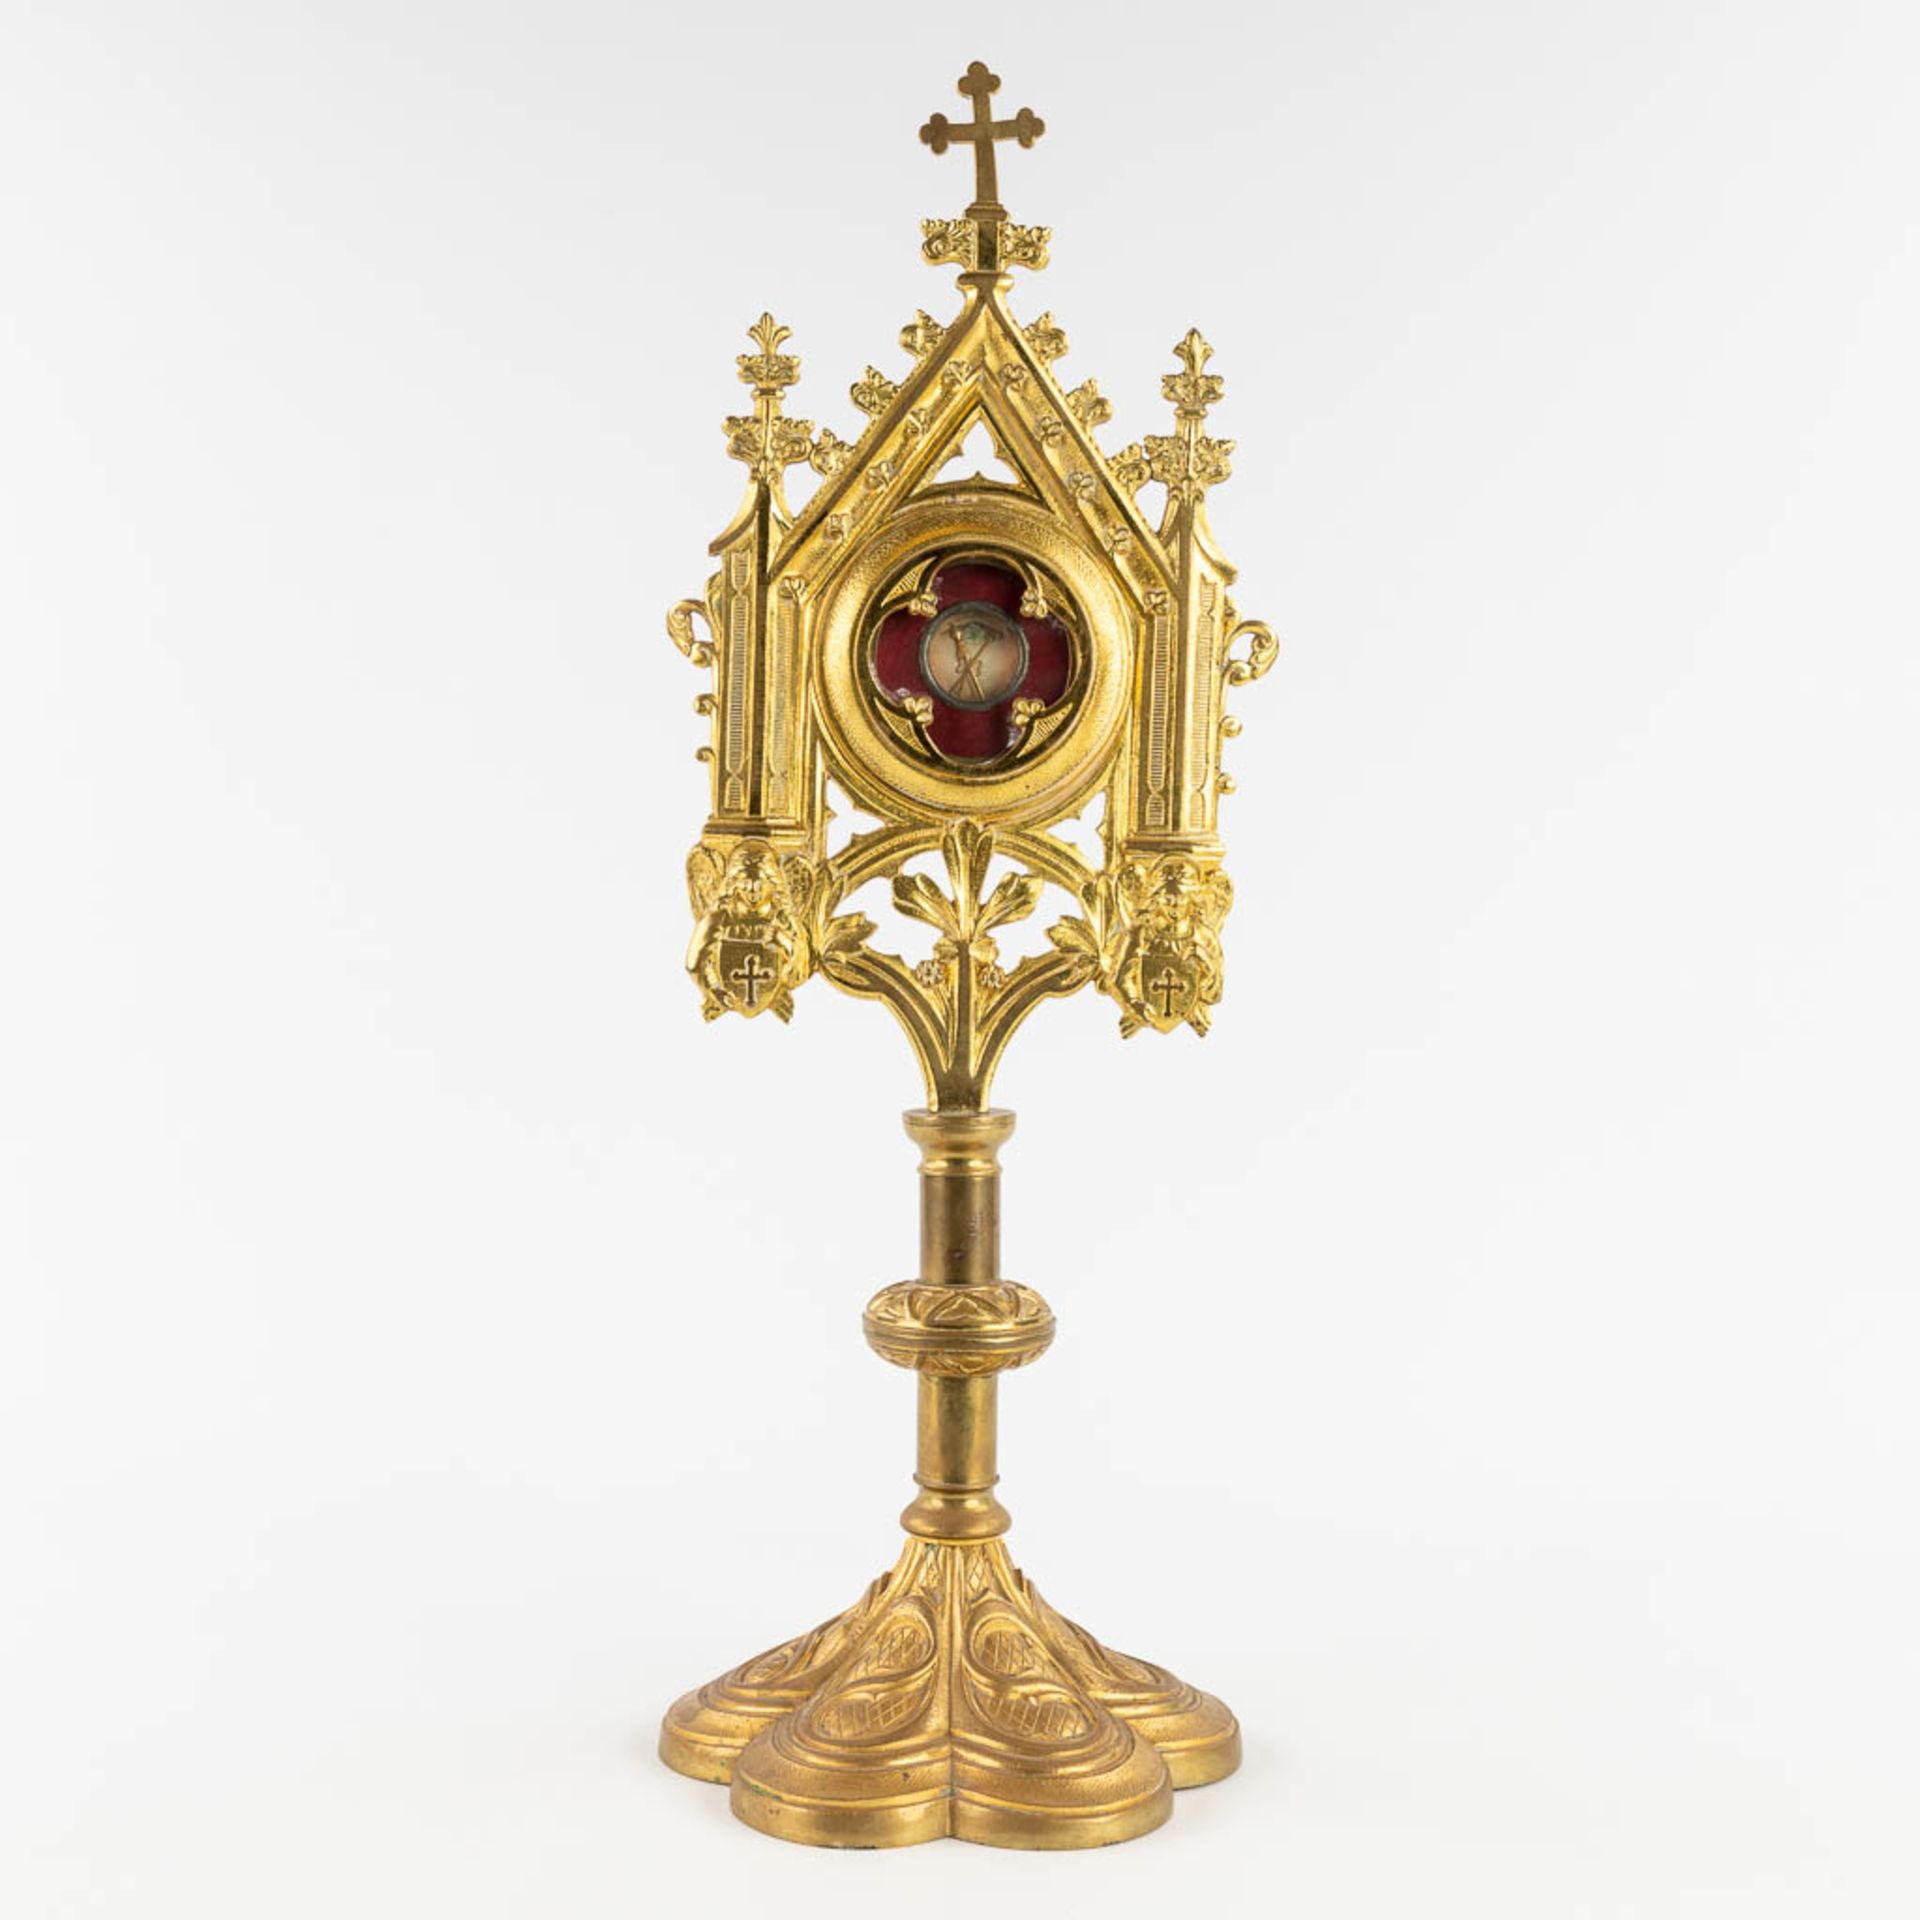 A sealed theca with relic 'De Spongia DNJC' in a bronze monstrance in a gothic revival style. 1858.